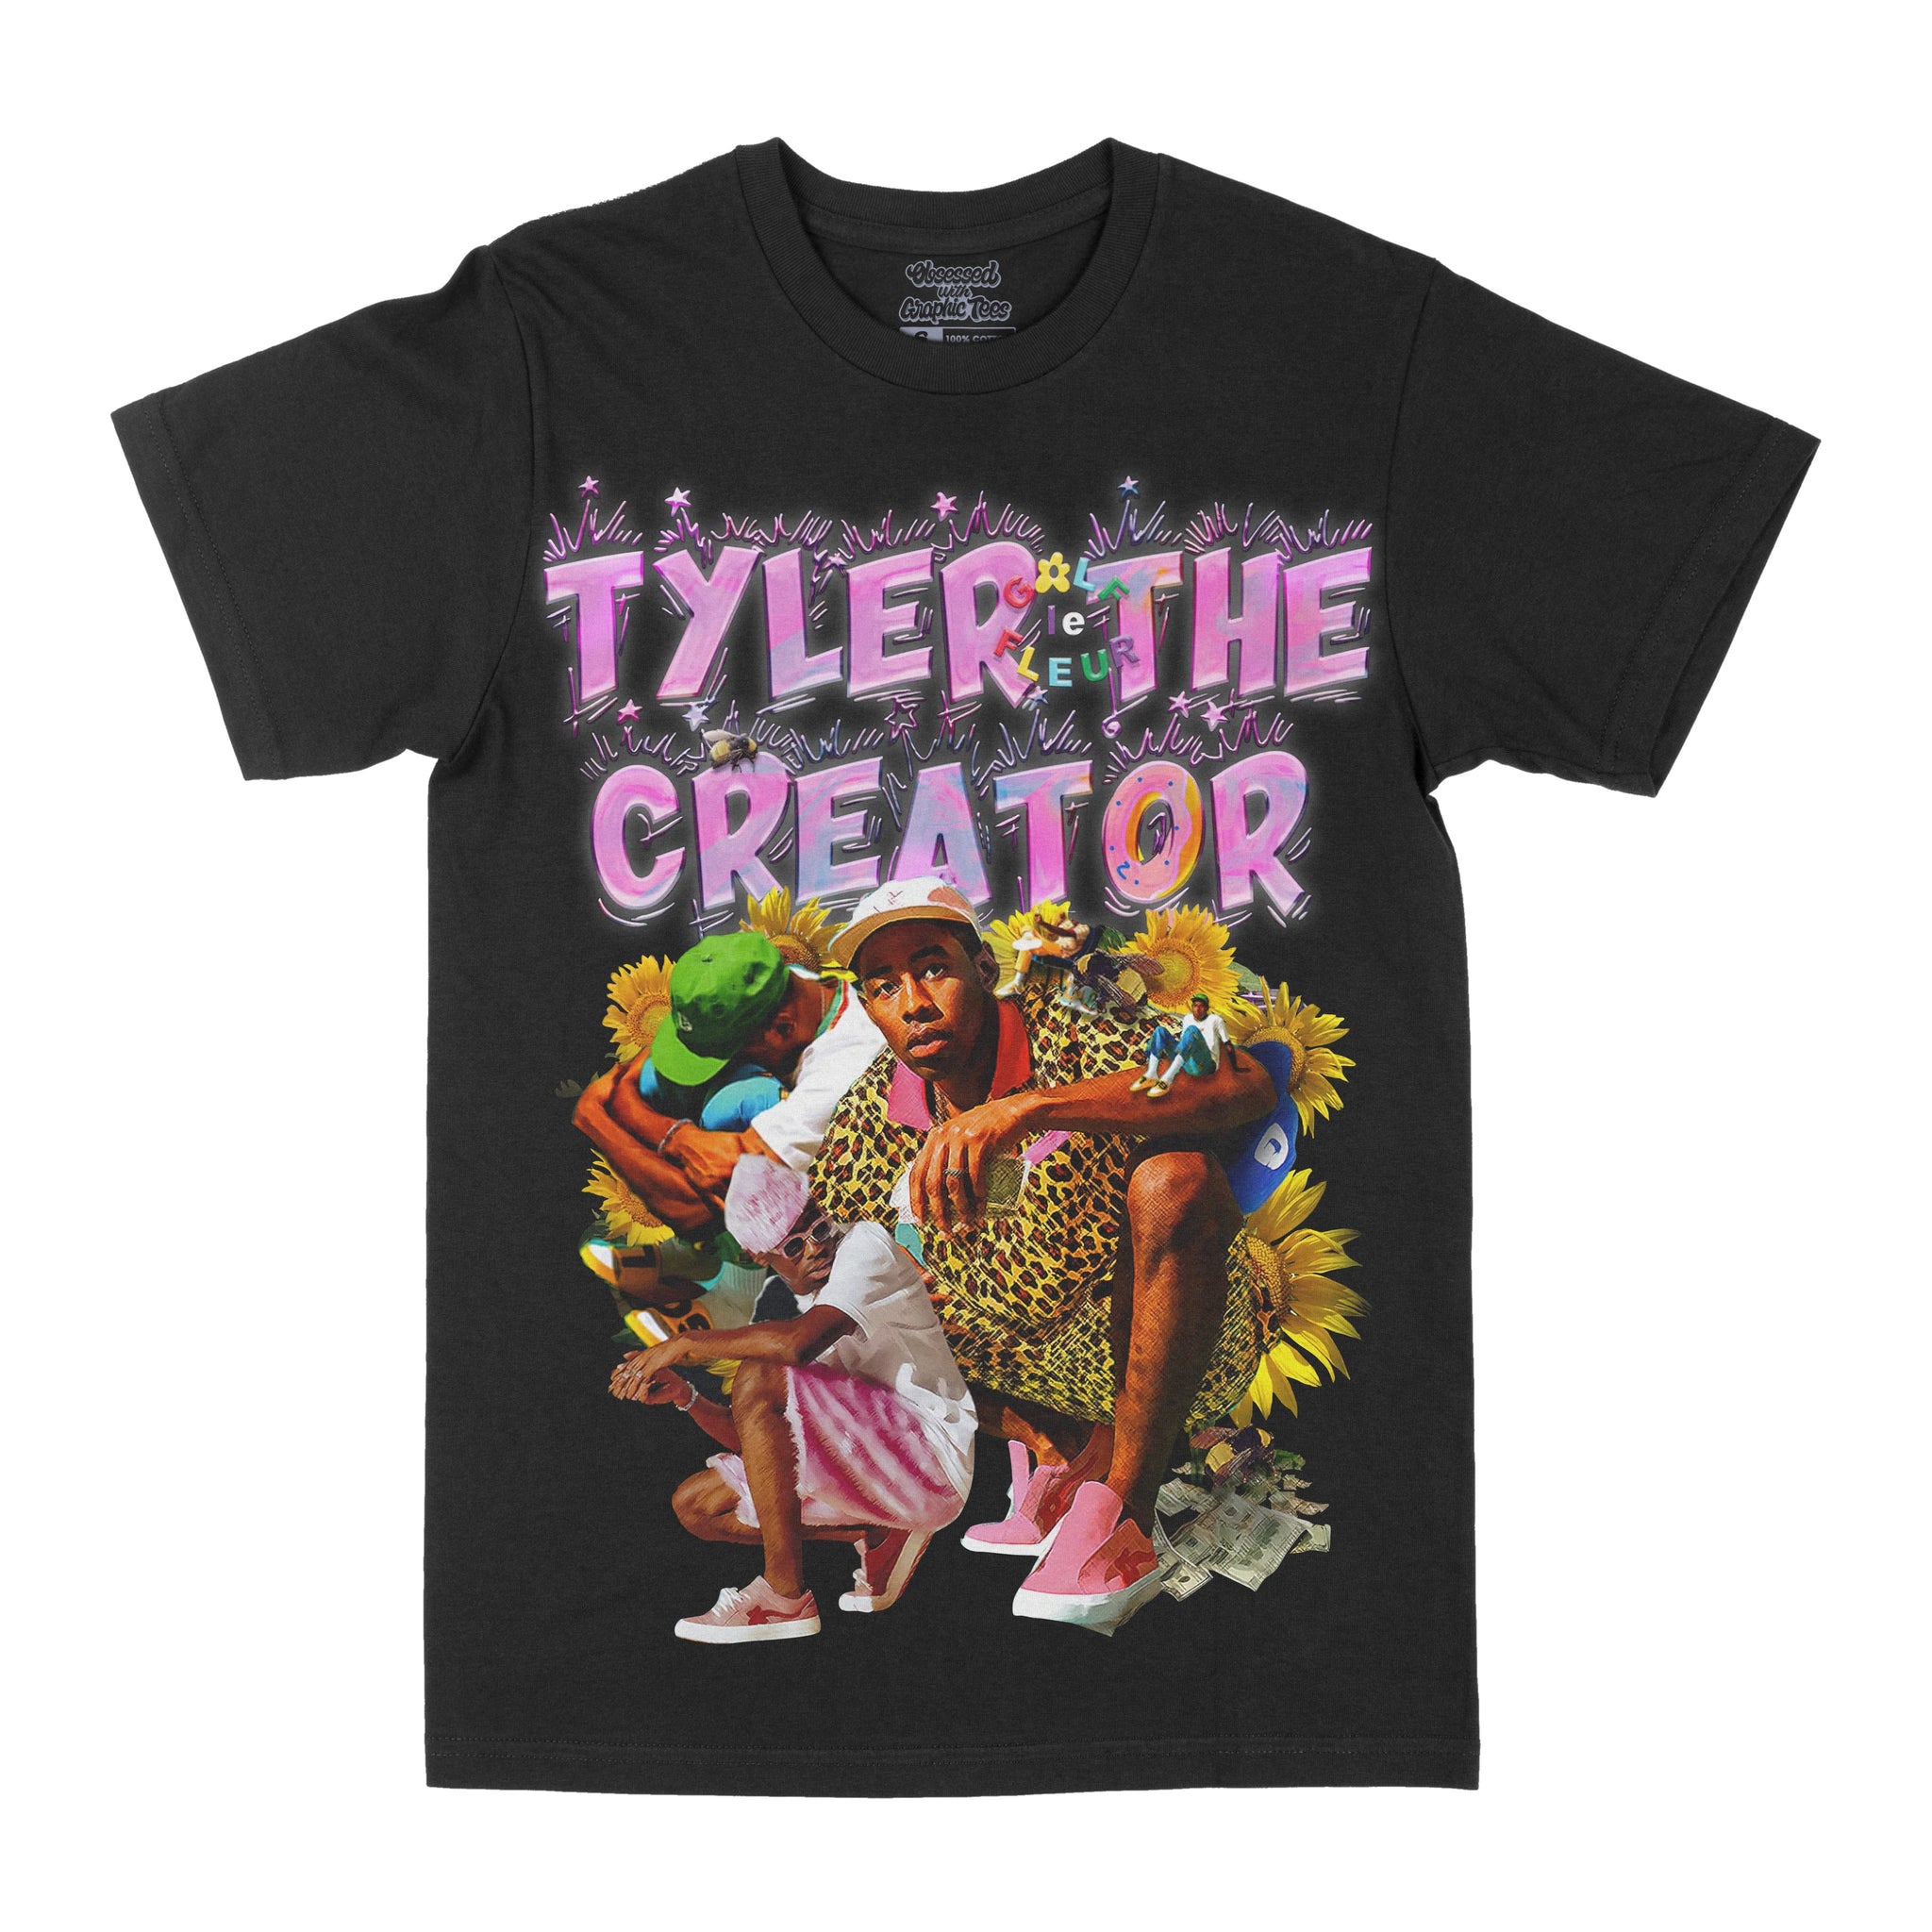 Tyler The Creator "Colors" Graphic Tee